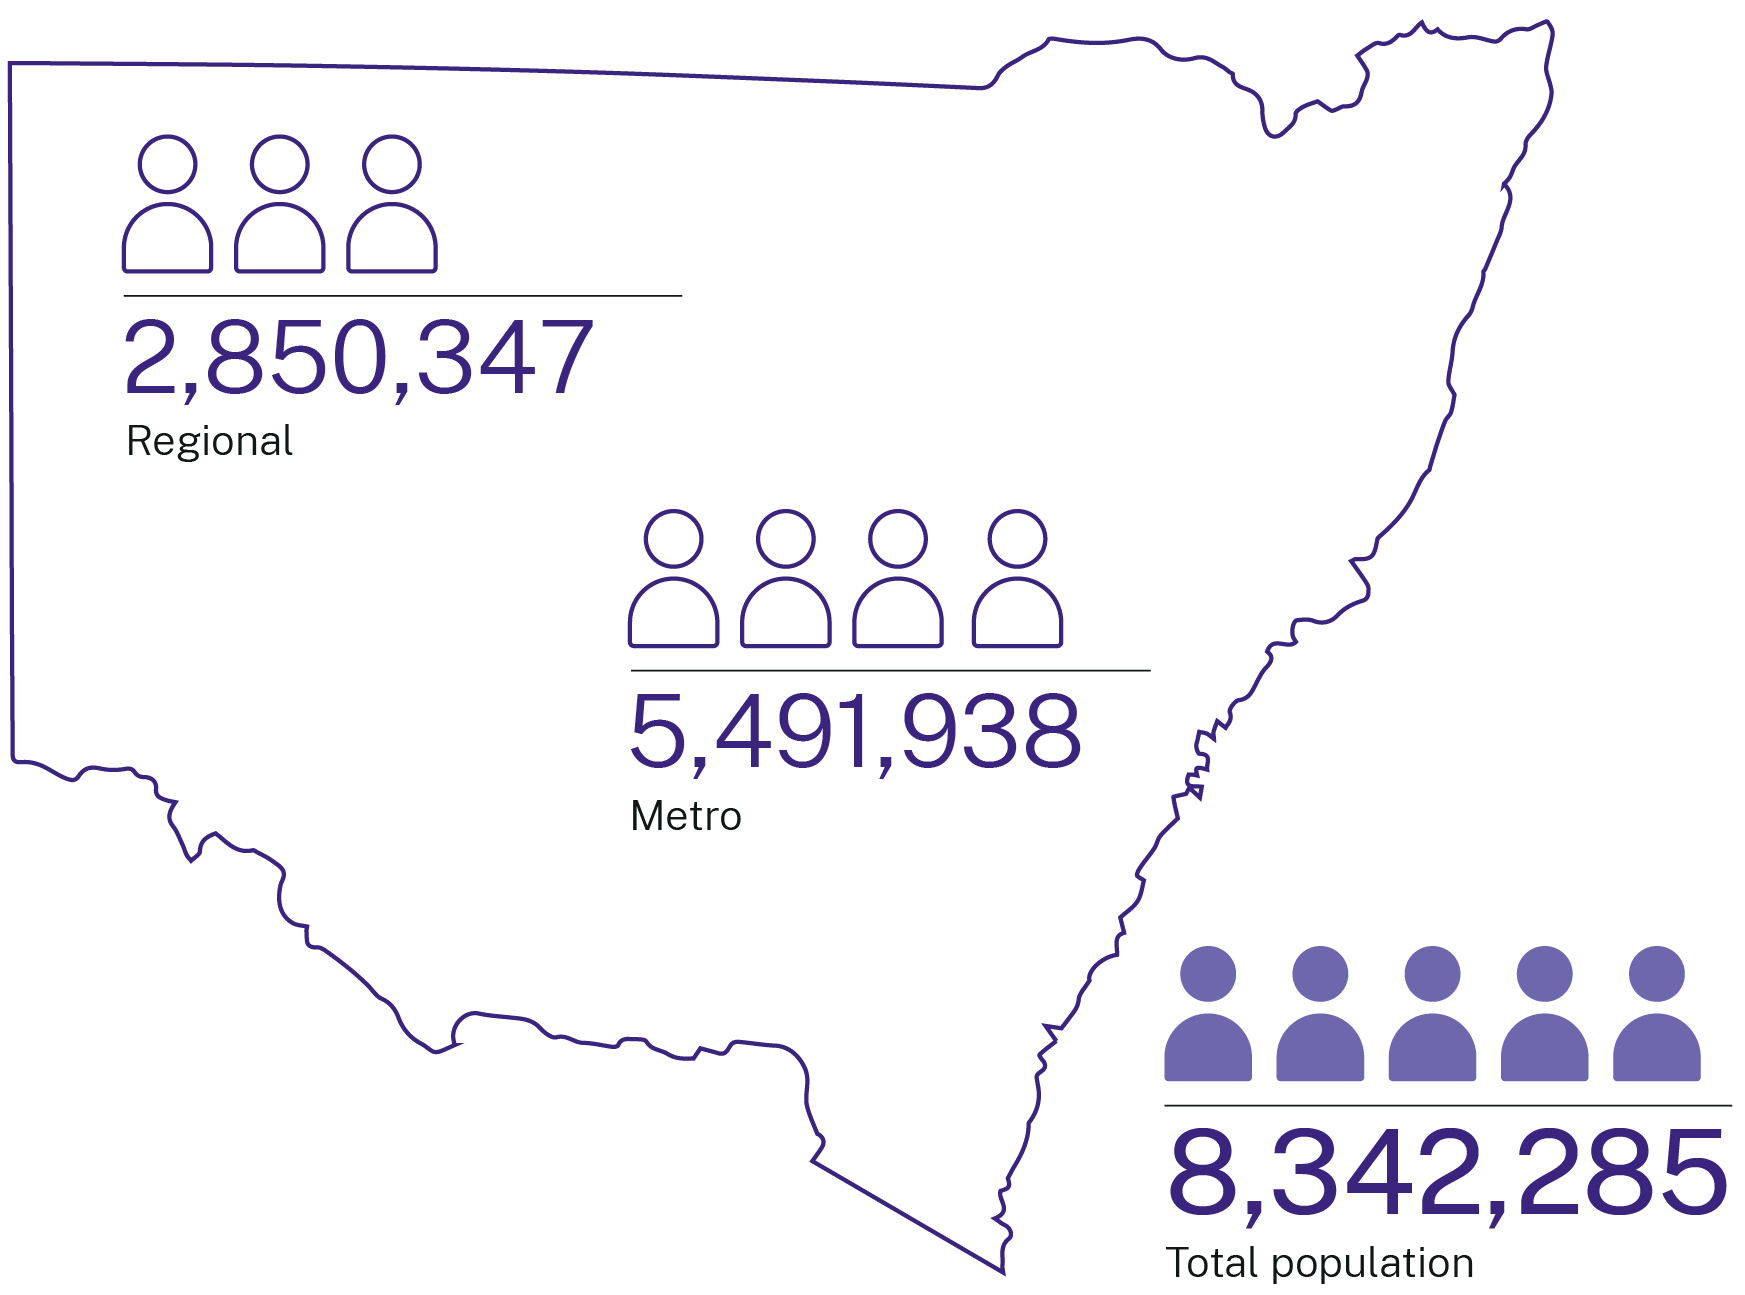 NSW has a total population of 8,342,285 people with 2,850,347 in regional and 5,491,938 in metro